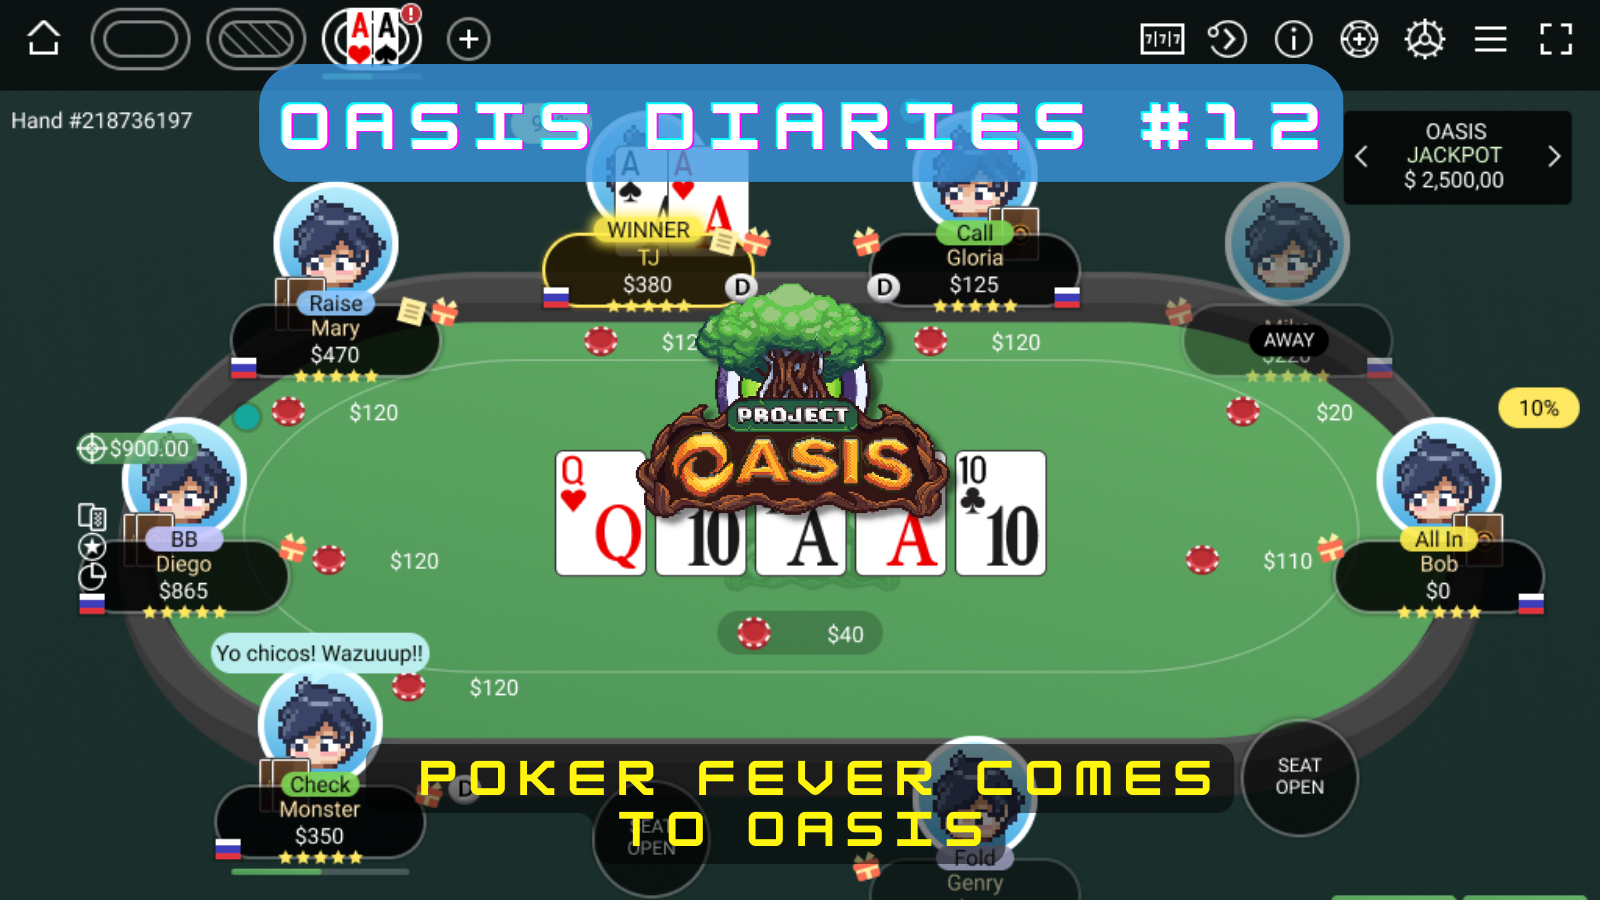 OASIS Diaries #12: Poker Fever Comes to Oasis